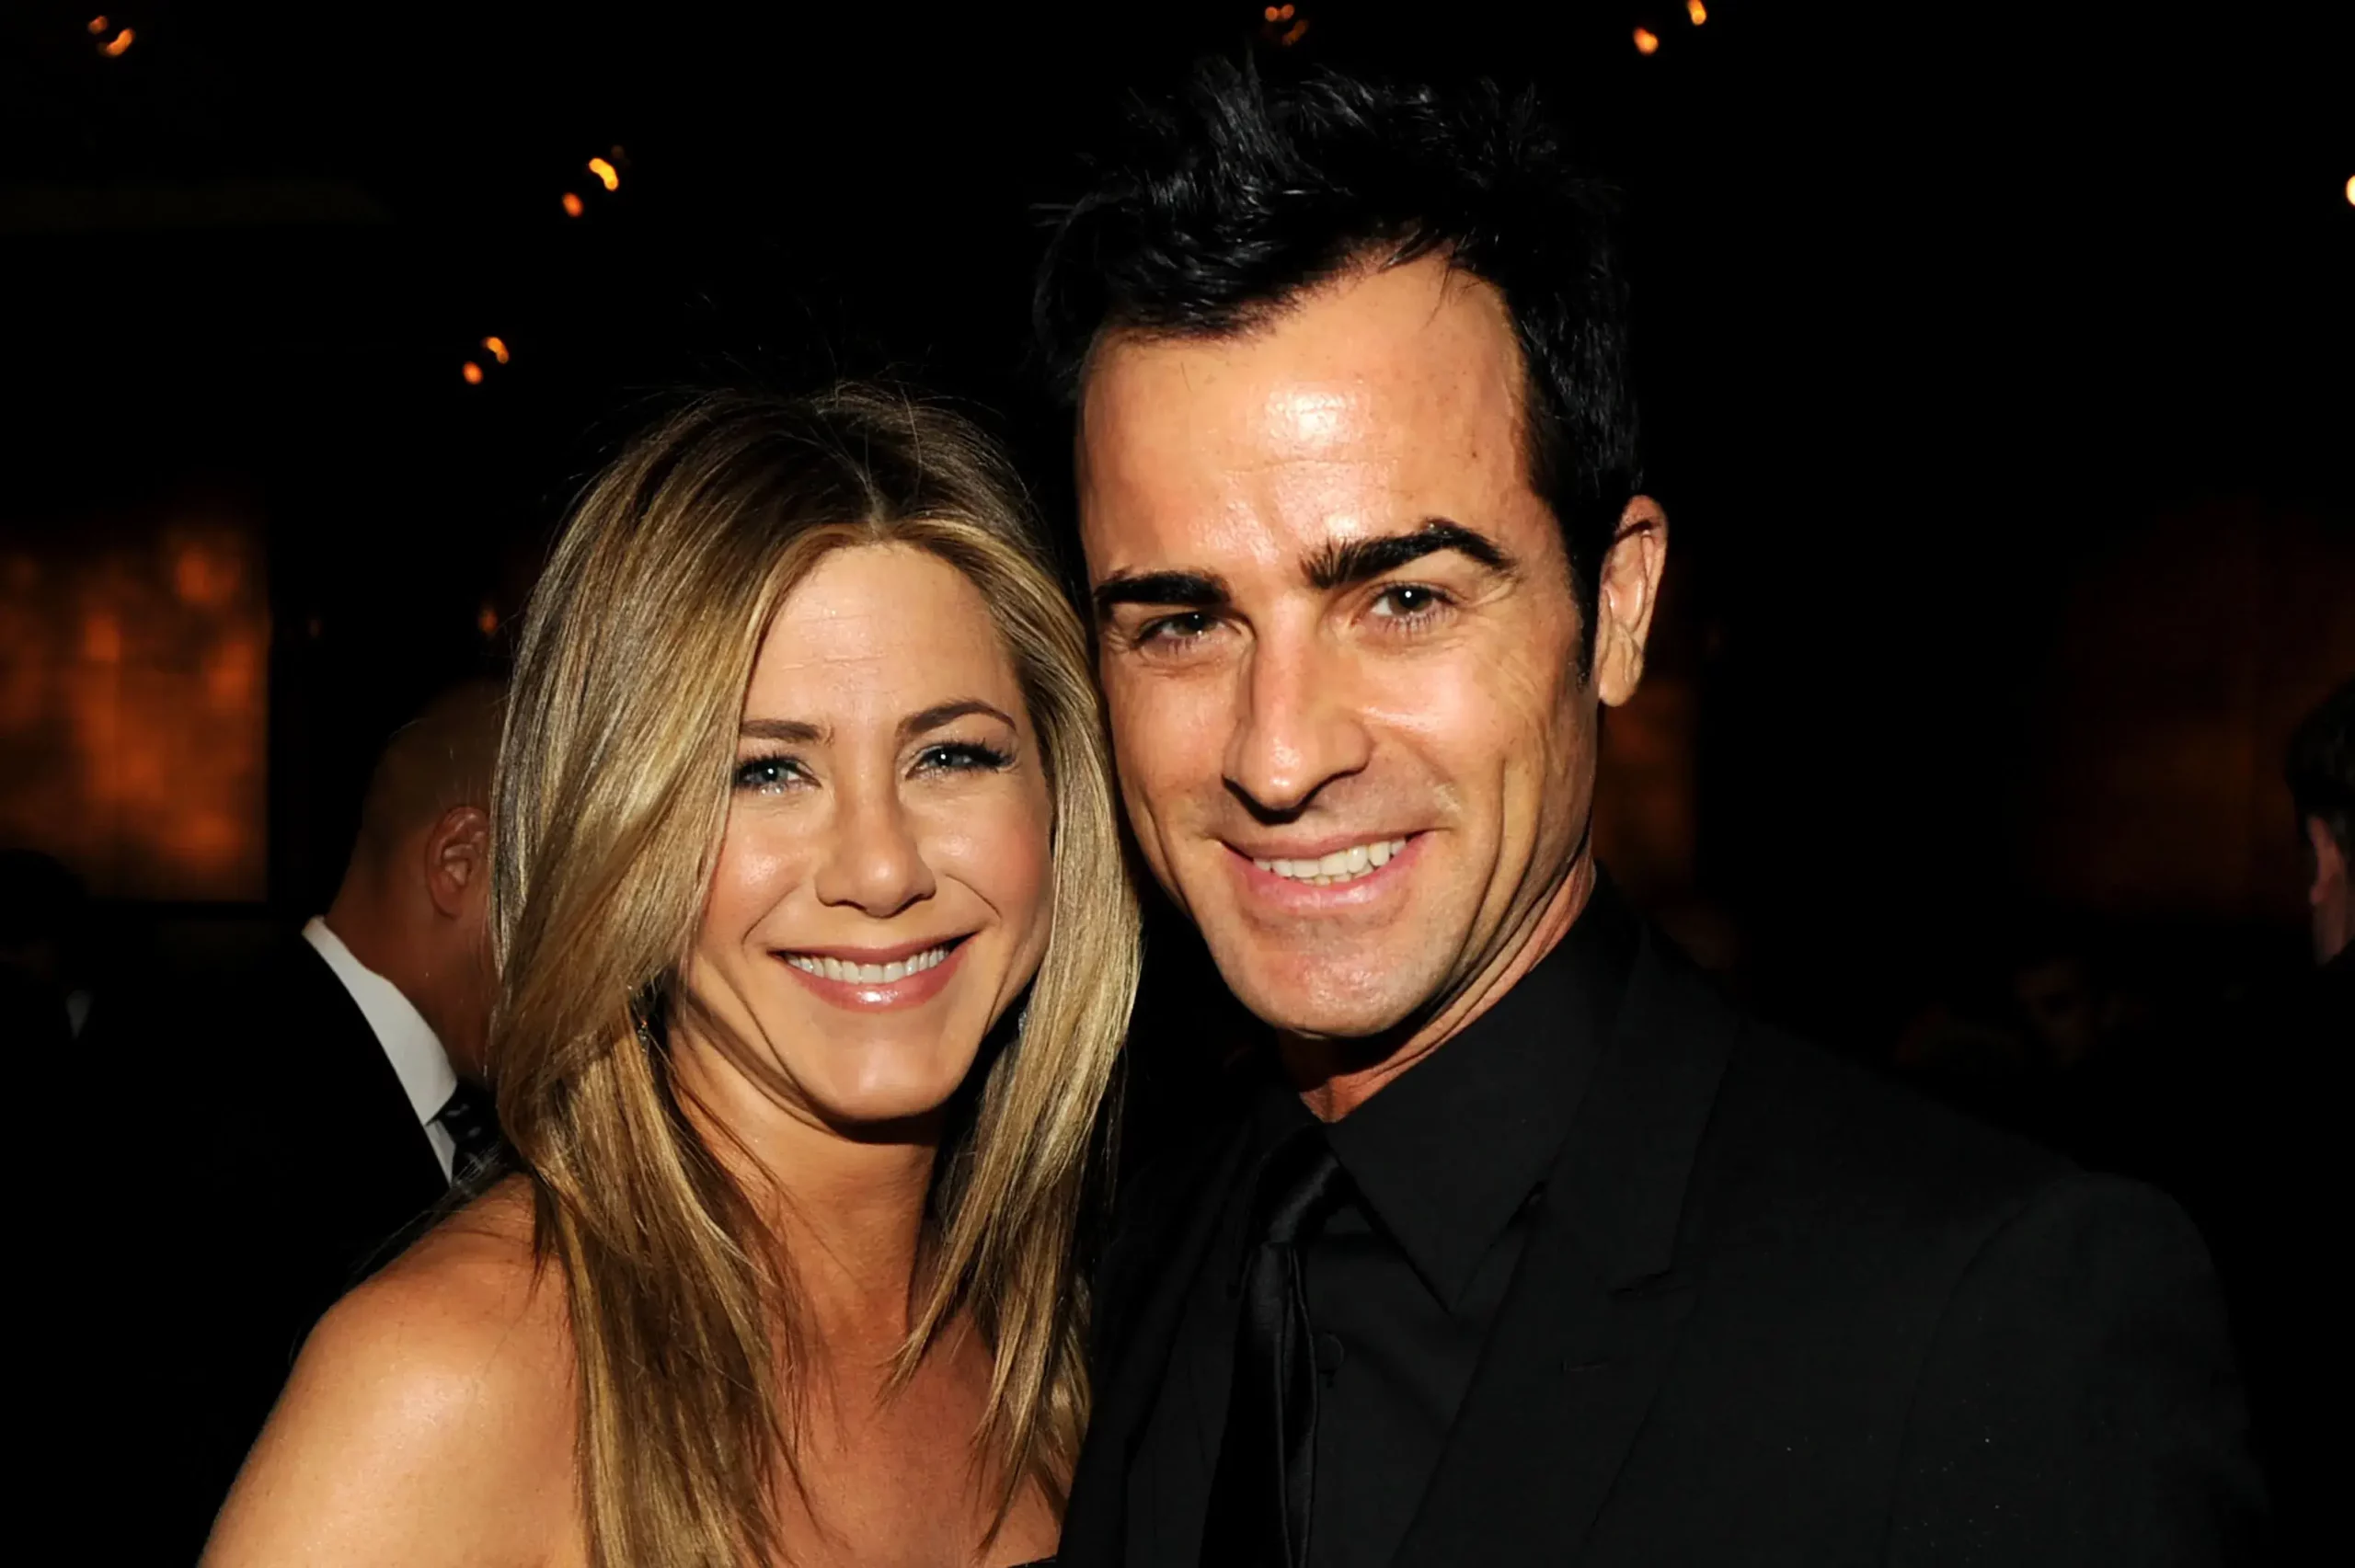 The Friends star and Justin Theroux rumored to be dating 